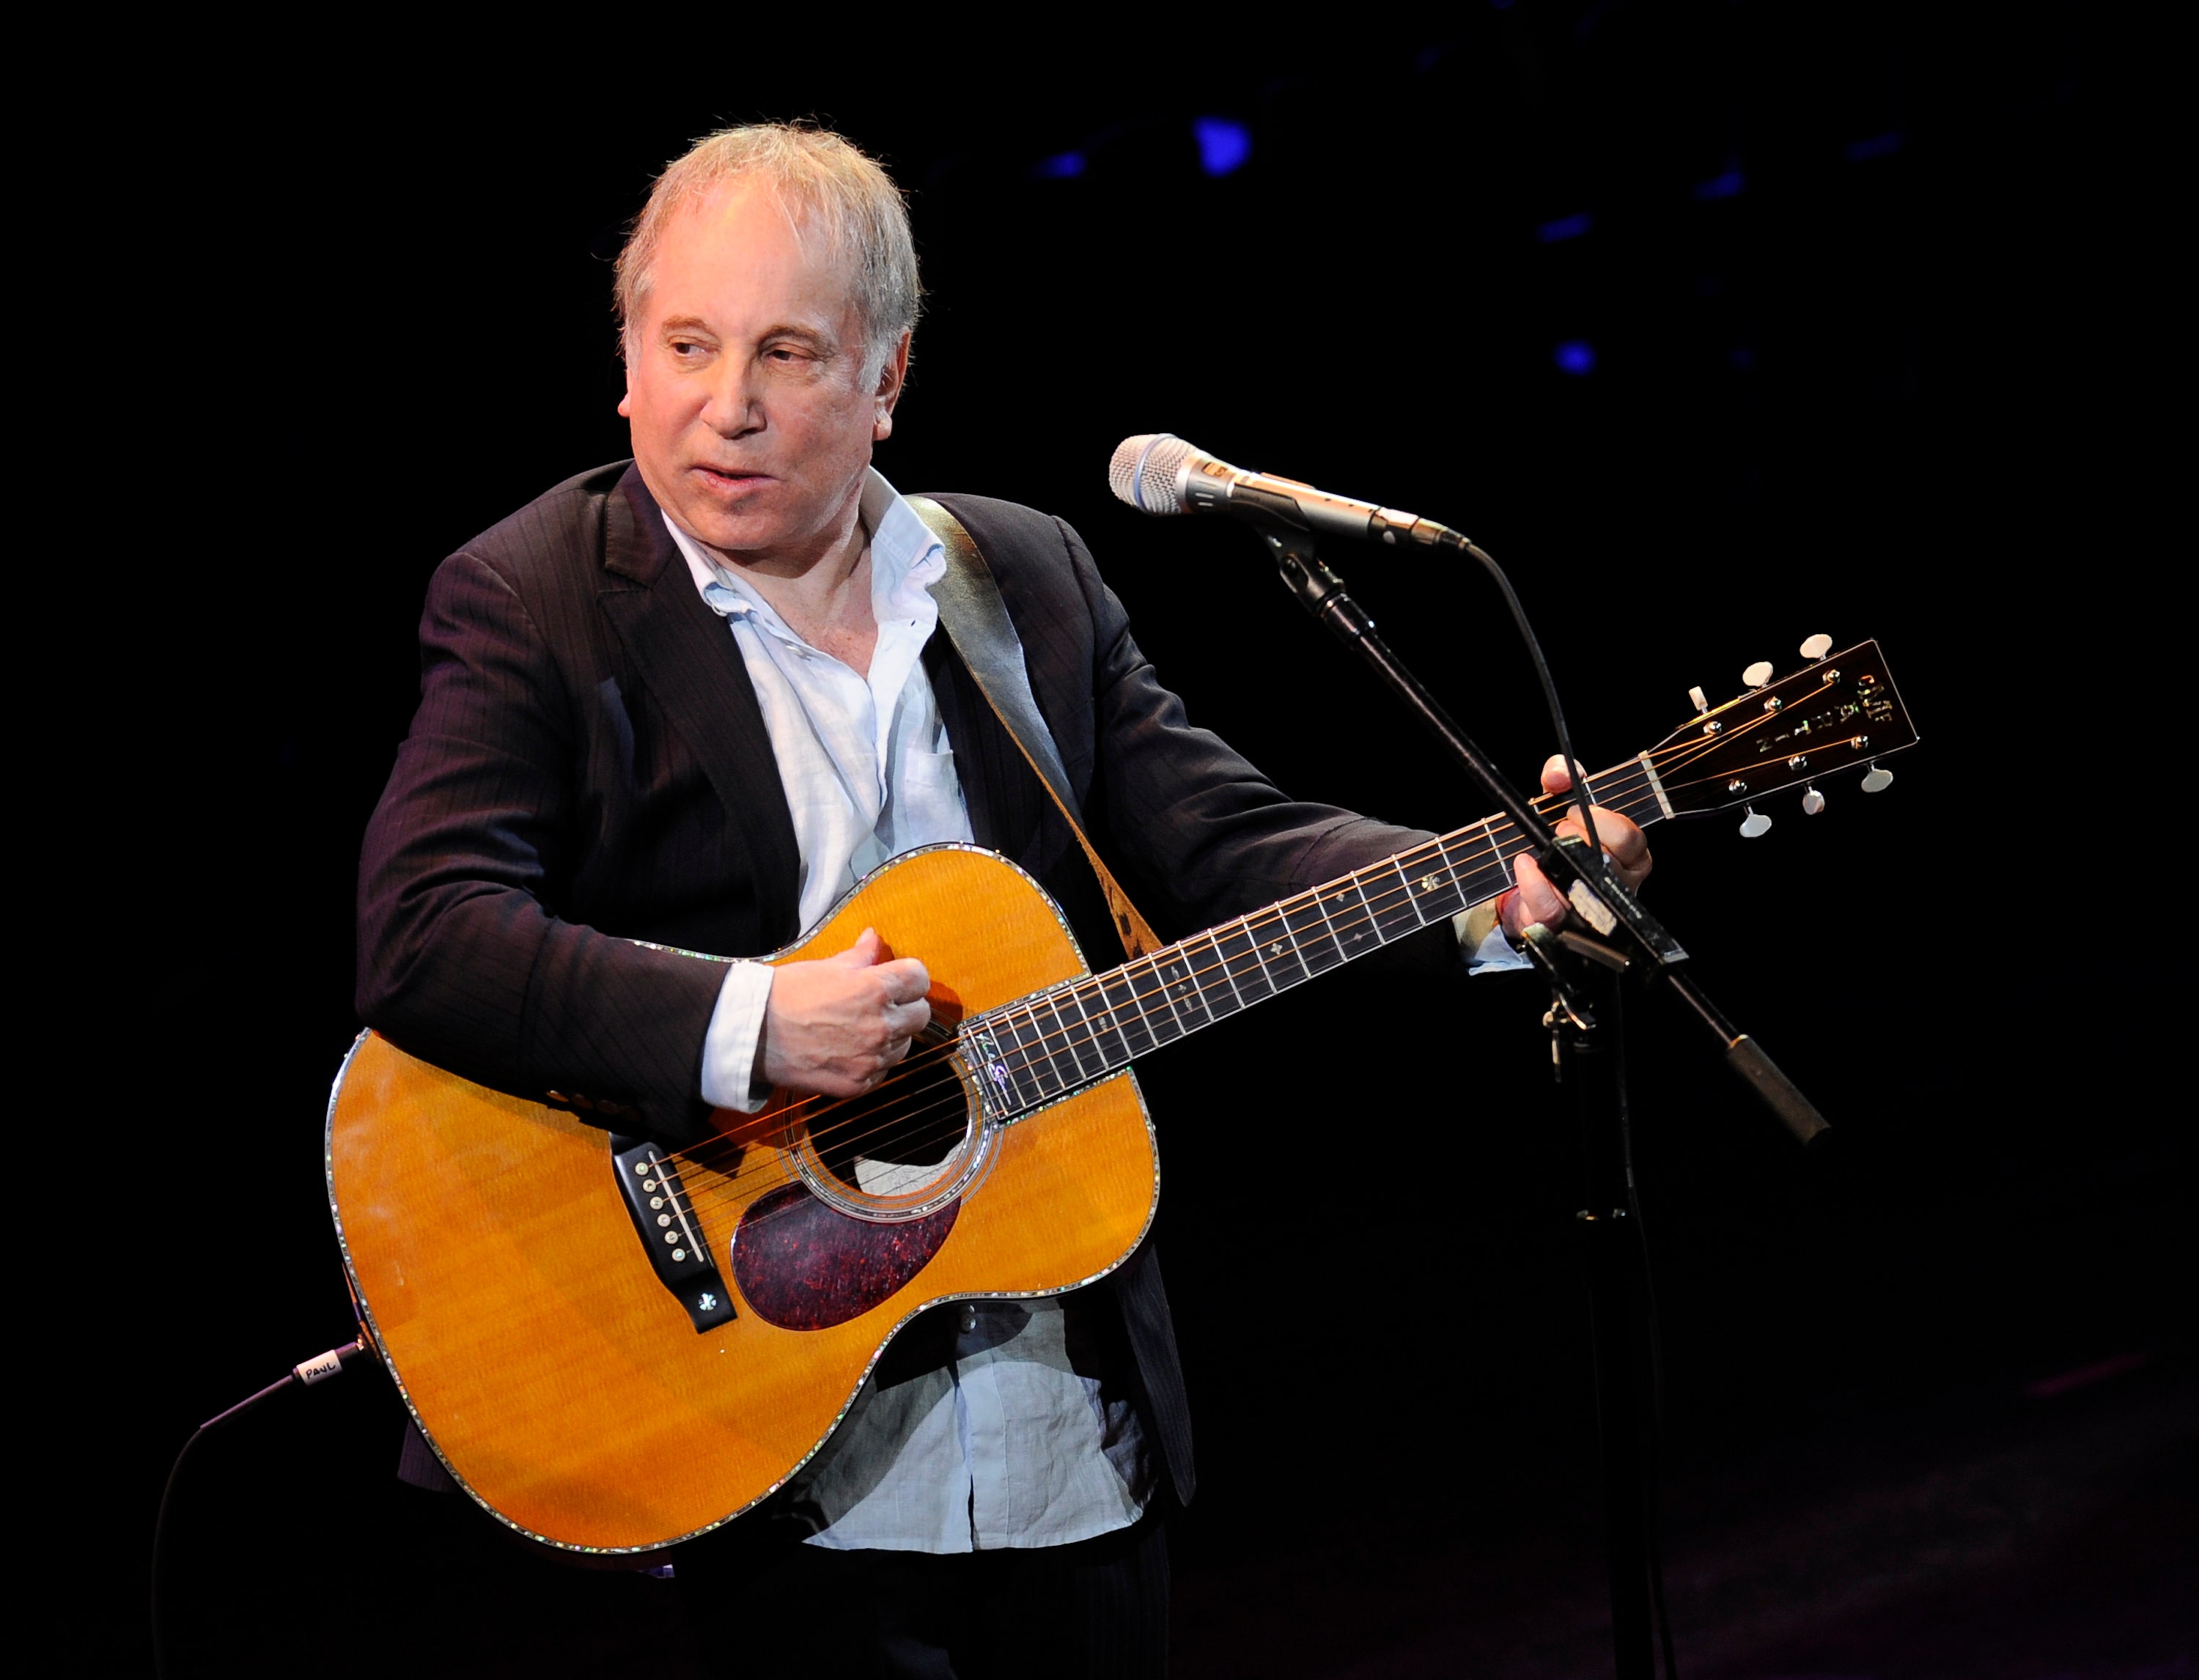 Paul Simon, Edie Brickell's charges dropped | Fox News